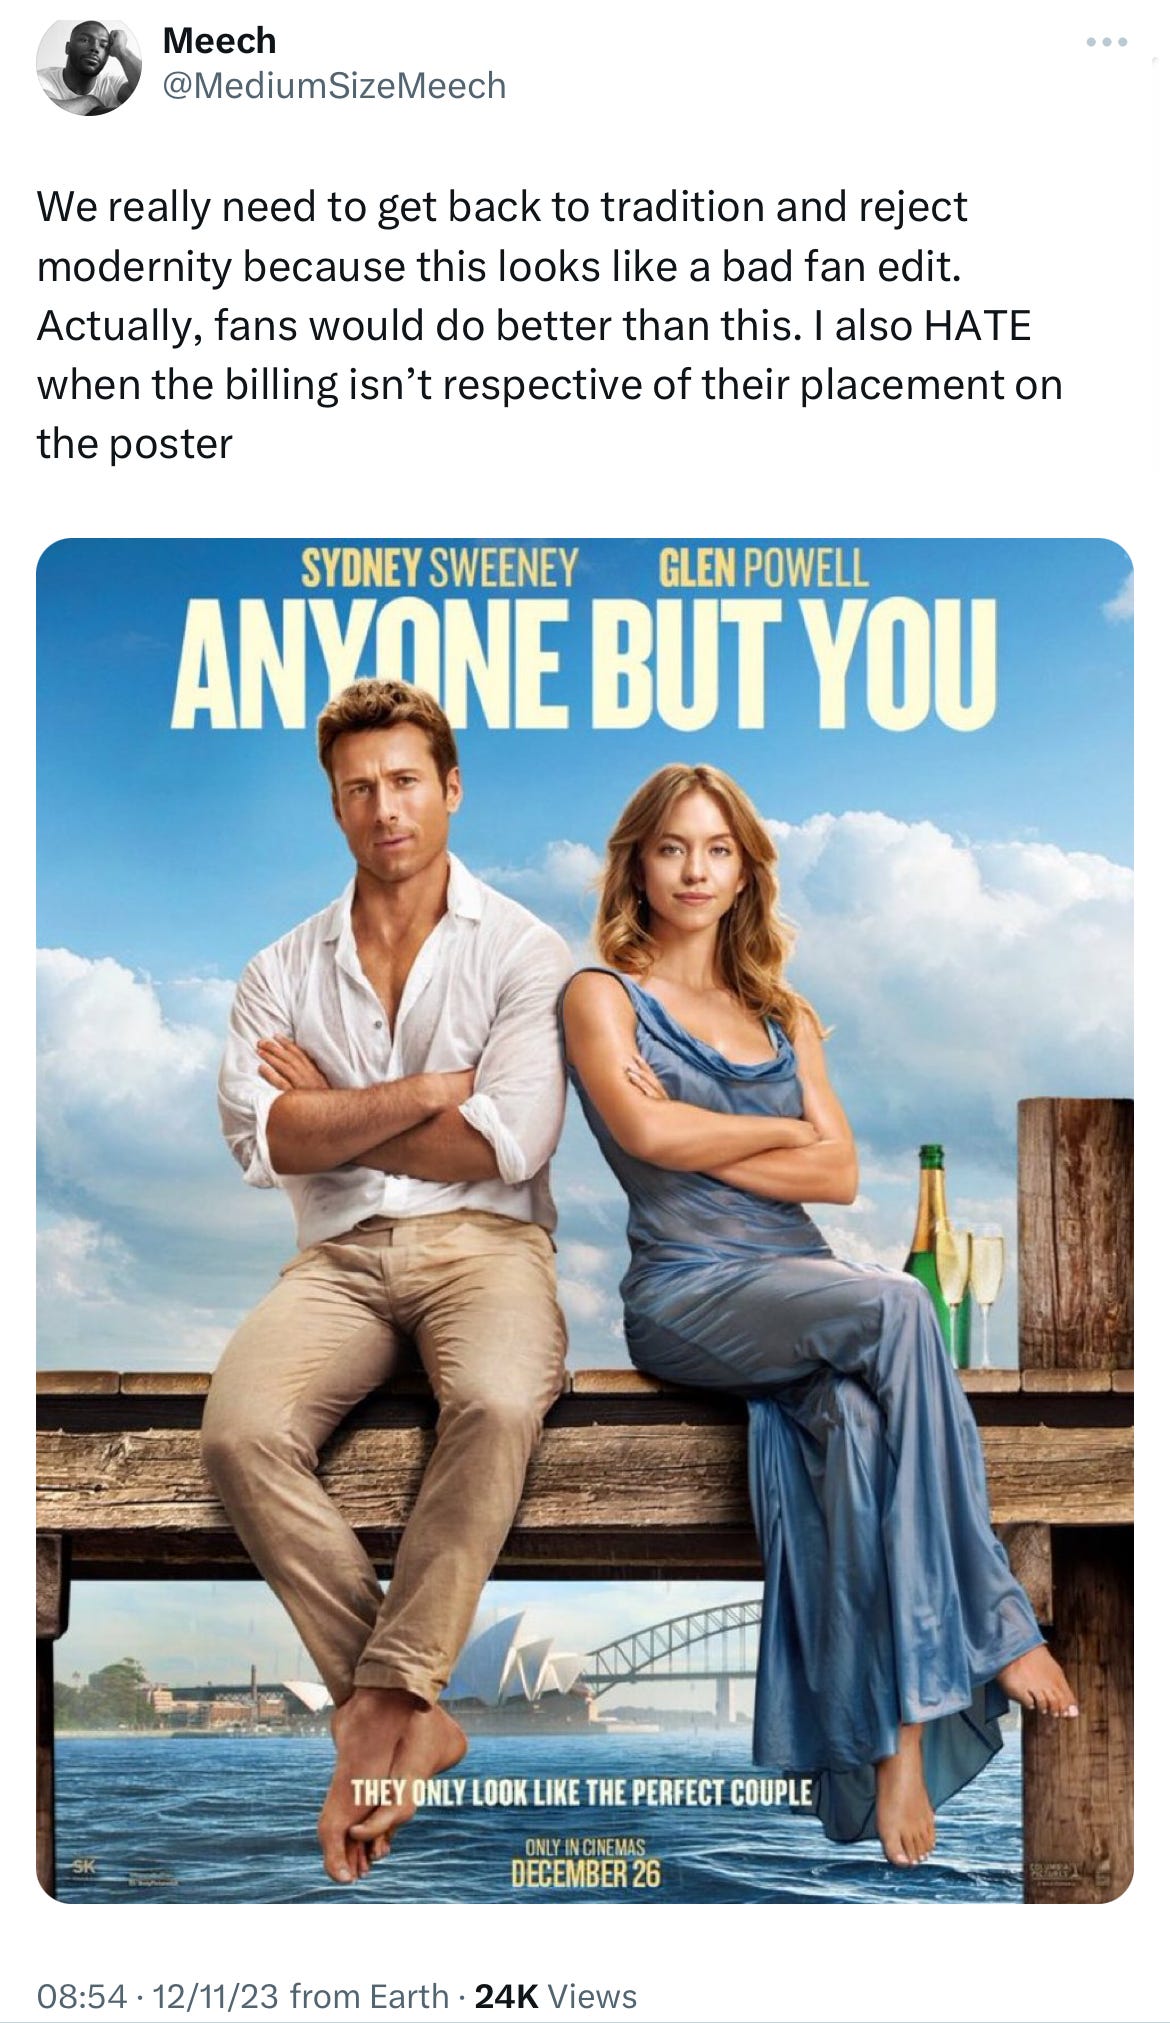 Anyone But You: Everything to Know About the Movie